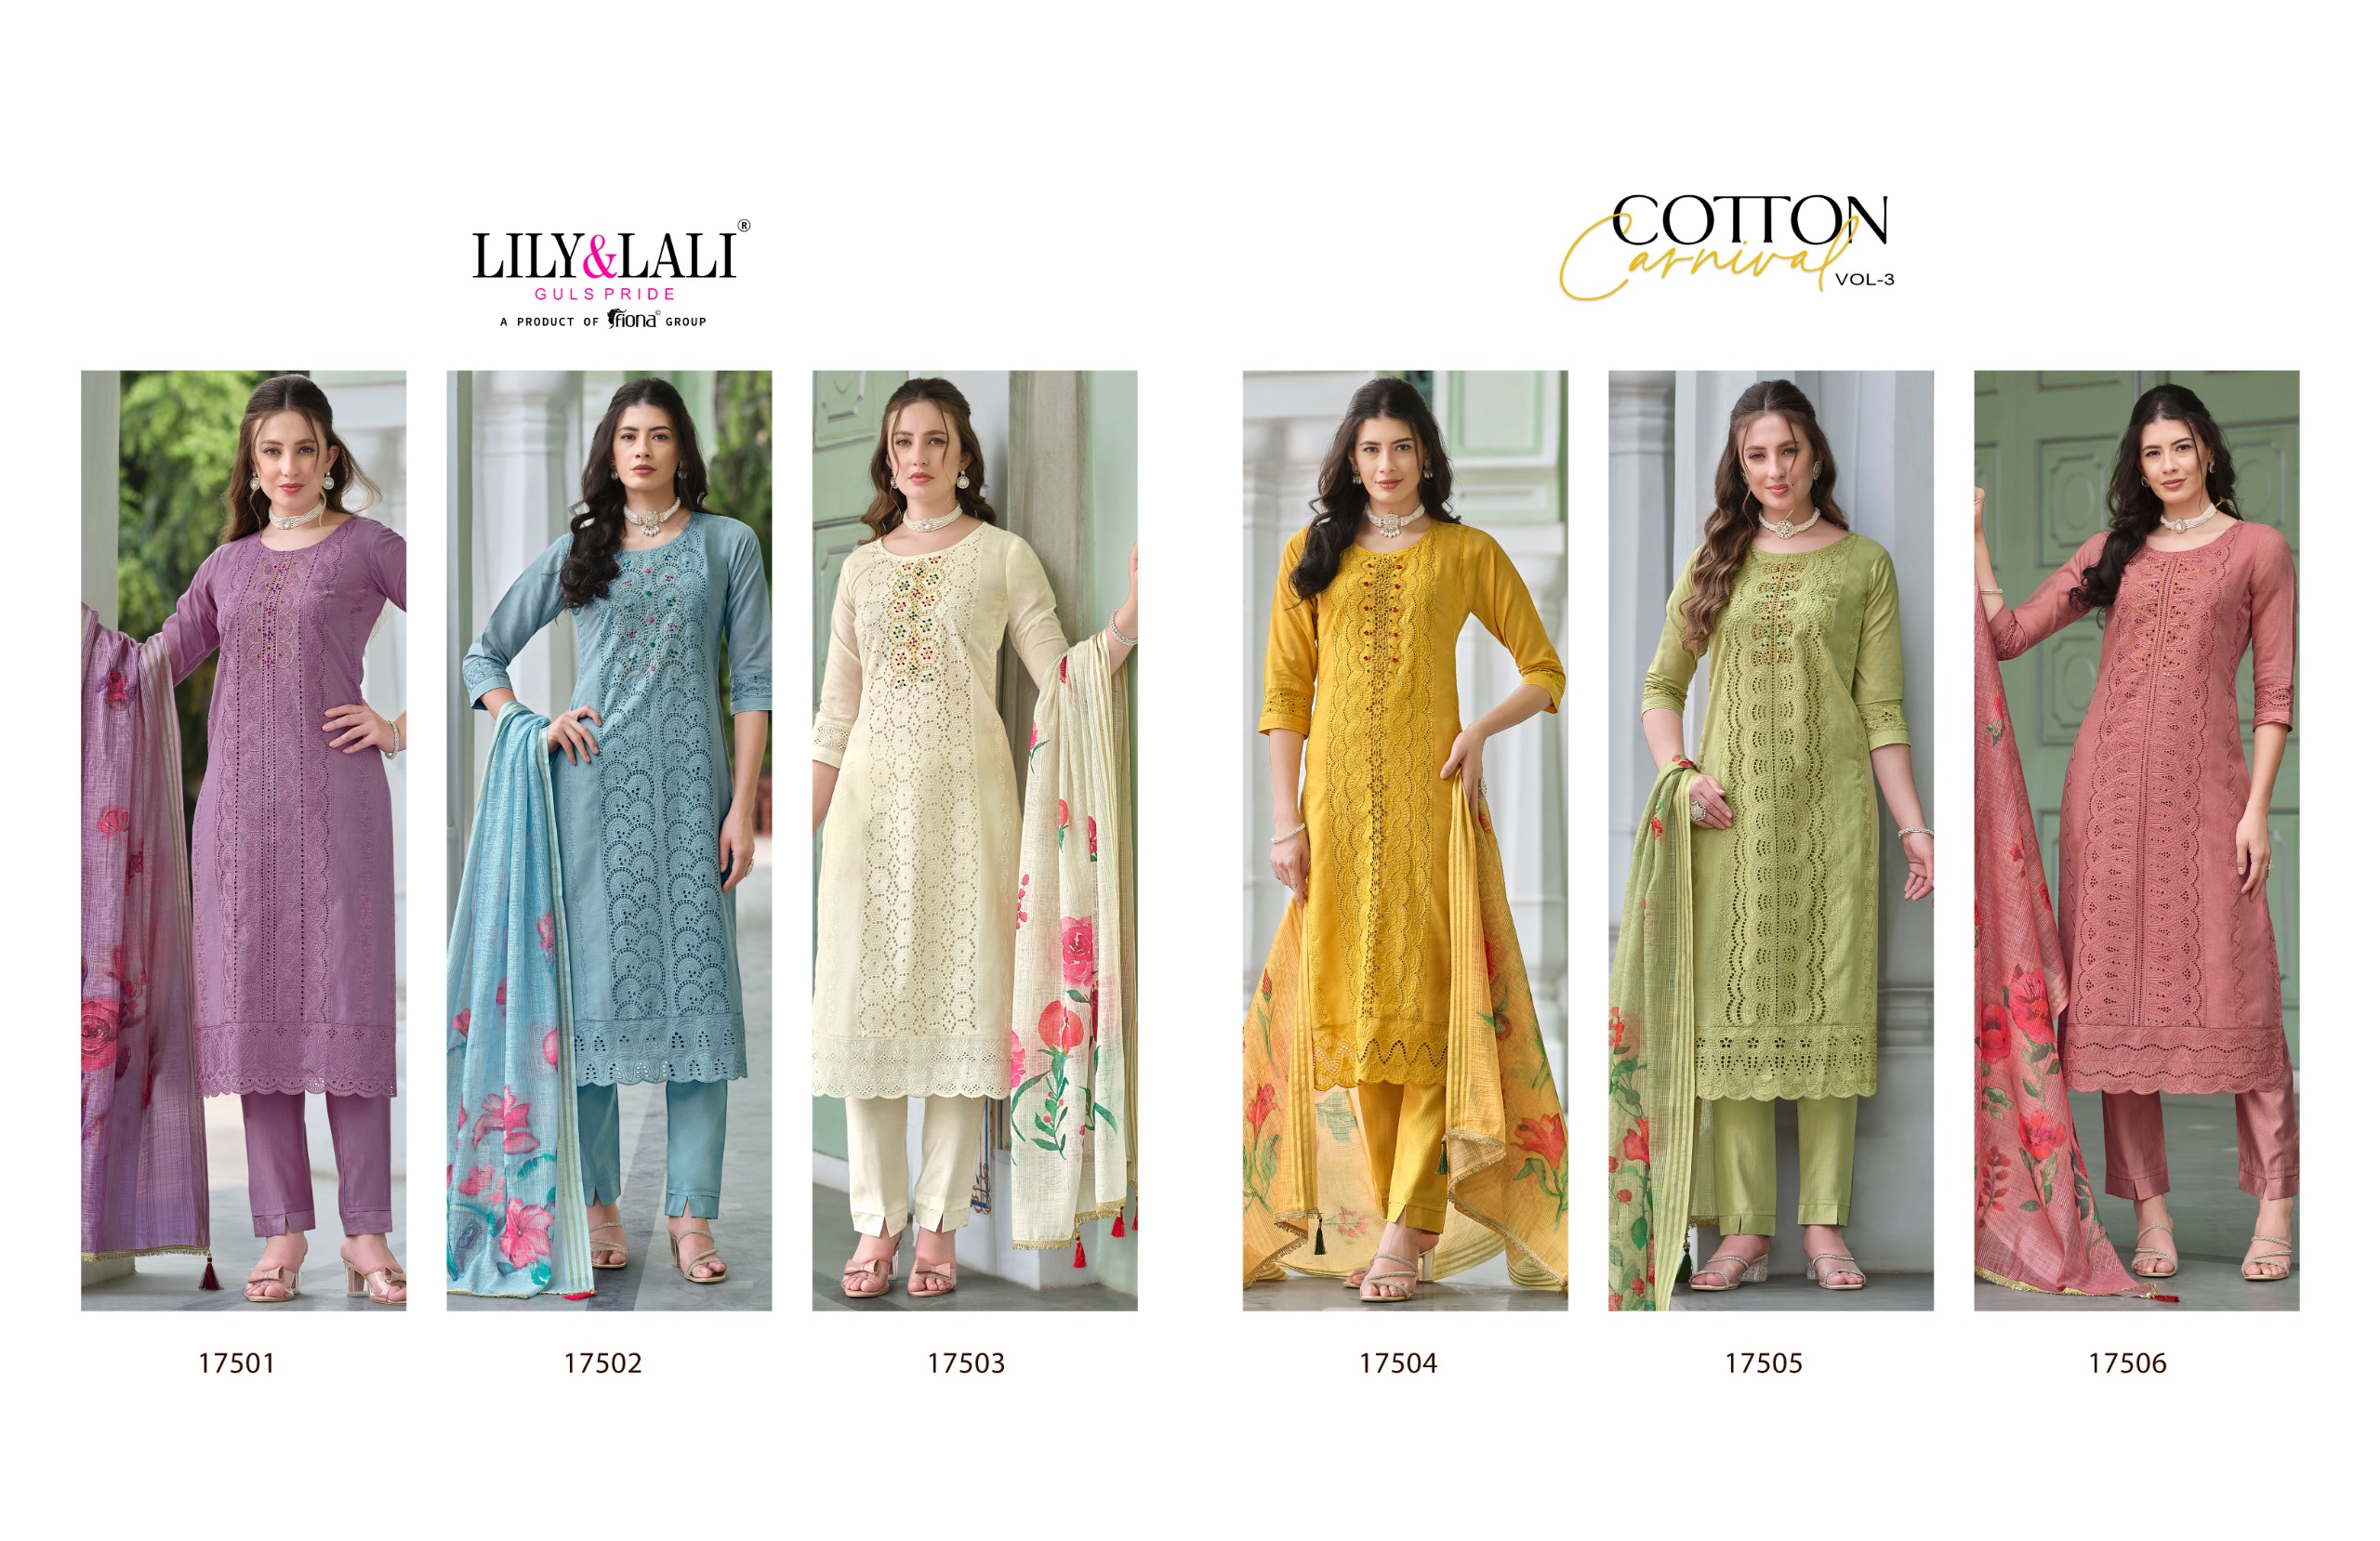 LILY & LALI COTTON CARNIVAL - 3 17501 TO 17506